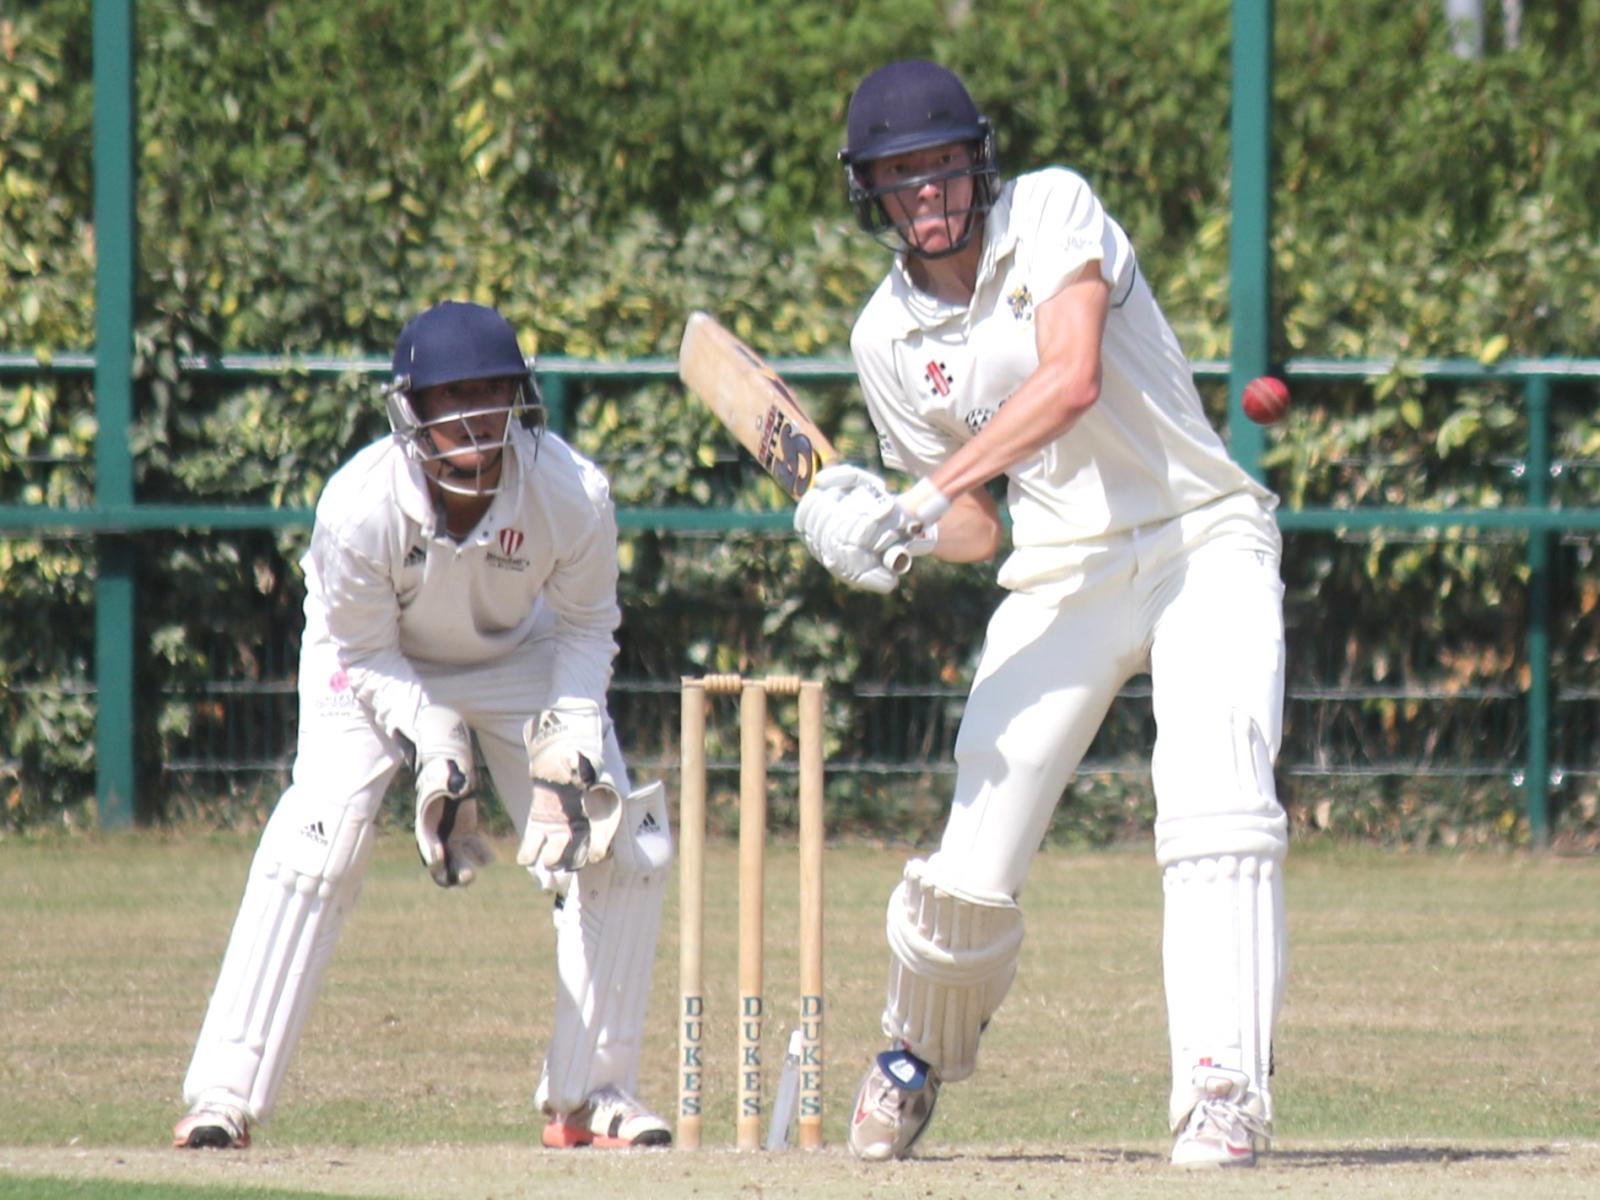 Ashley Causey batting for Bovey Tracey against Exeter | Photo: Gerry Hunt